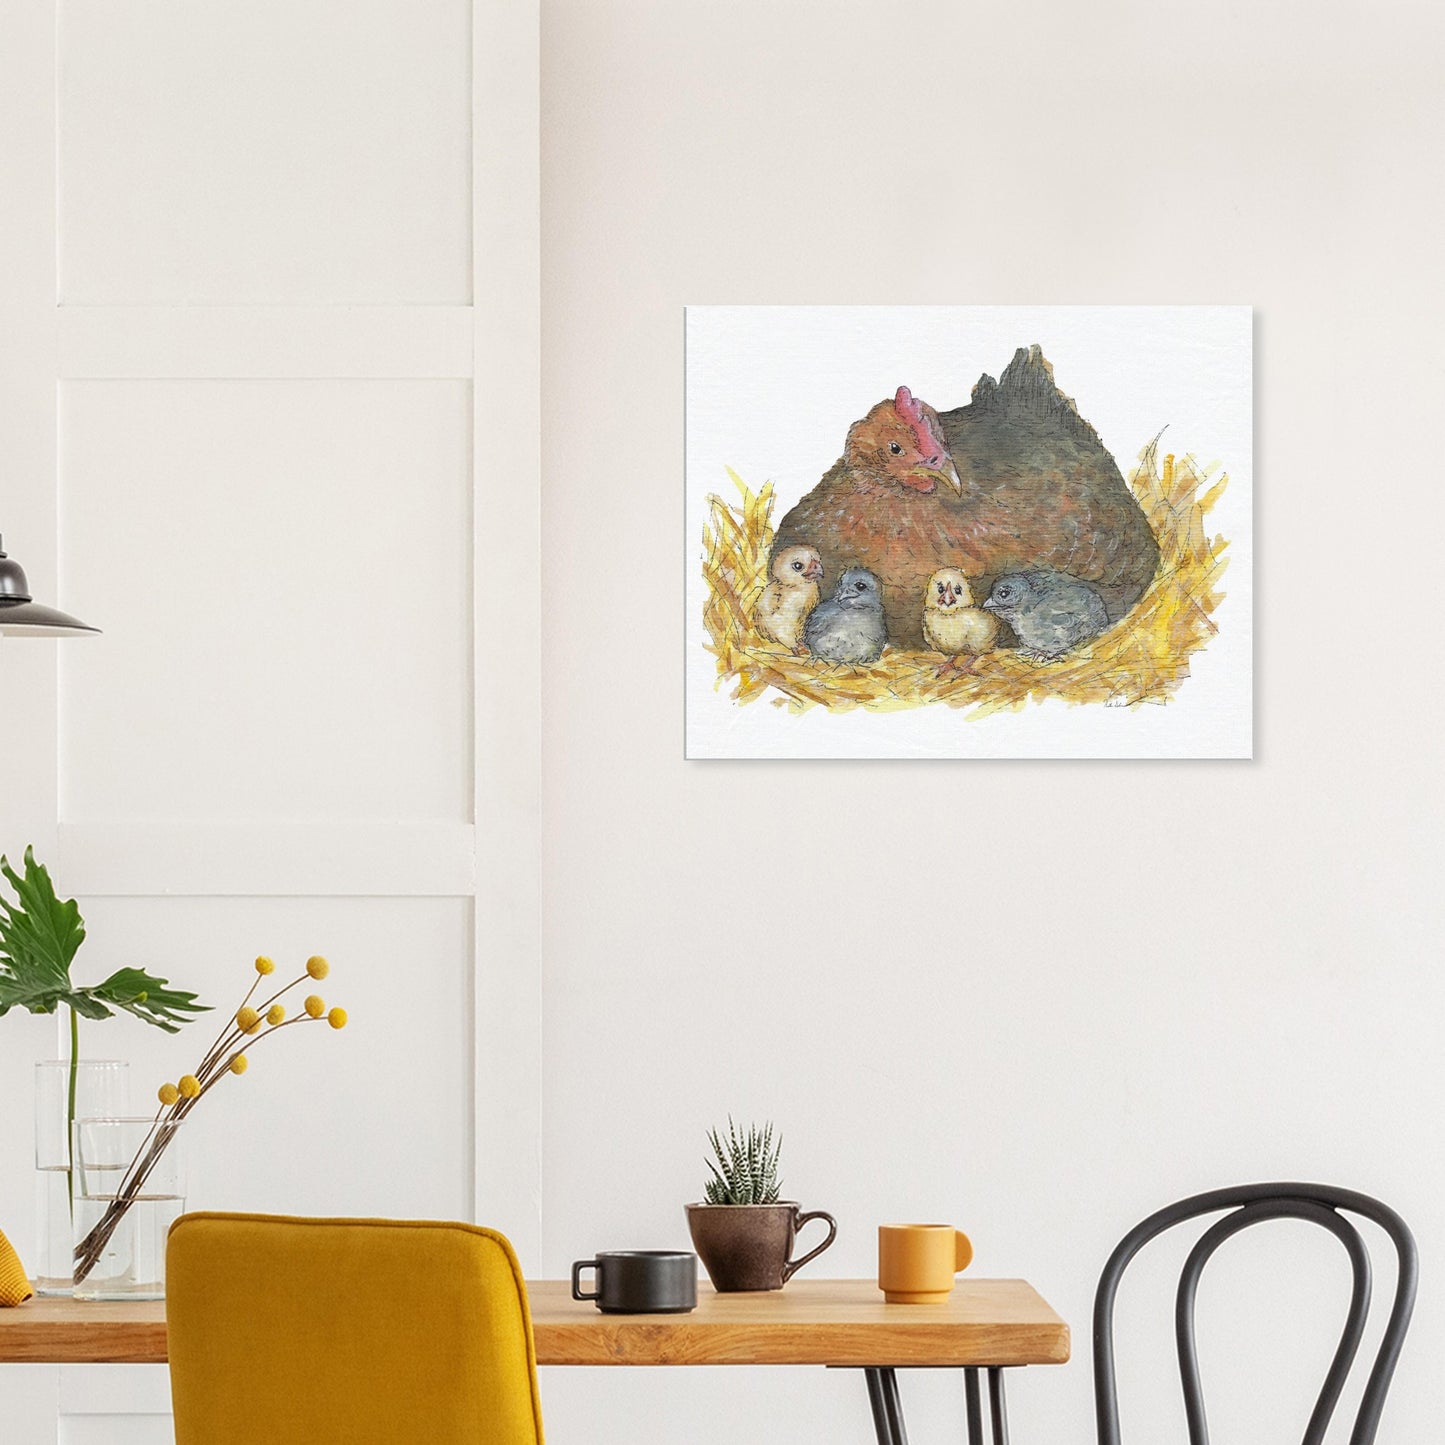 24 by 30 inch slim canvas Mother Hen print. Features a watercolor mother hen and her four chicks in a nest. Shown on wall above kitchen table and chairs.